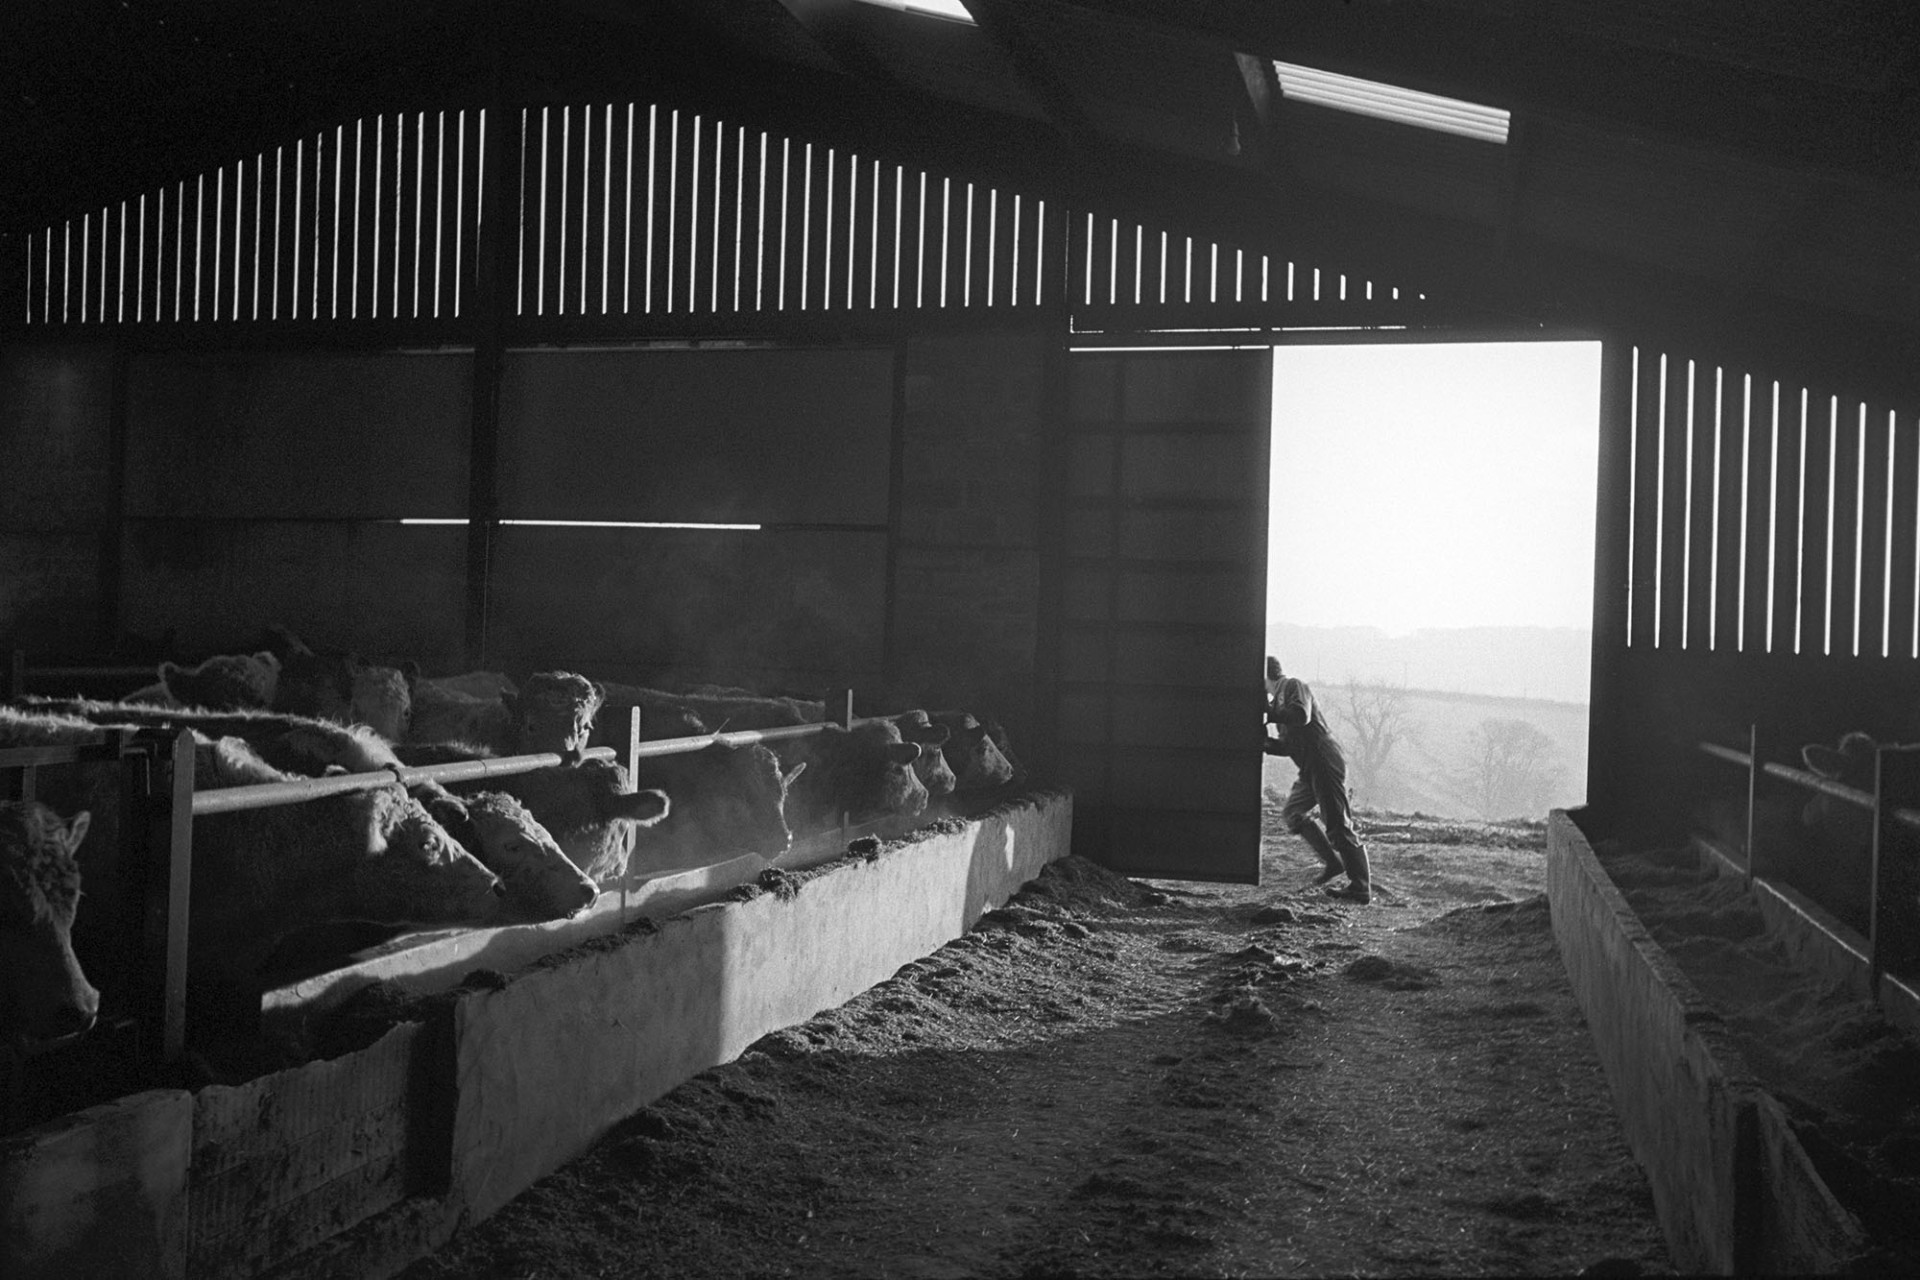 Farmer opening door of cattle shed, early morning light, bullocks in stalls. 
[A man opening the door of a cattle shed in the early morning at Parsonage Farm, Chulmleigh. The bullocks are stood in their stalls eating.]